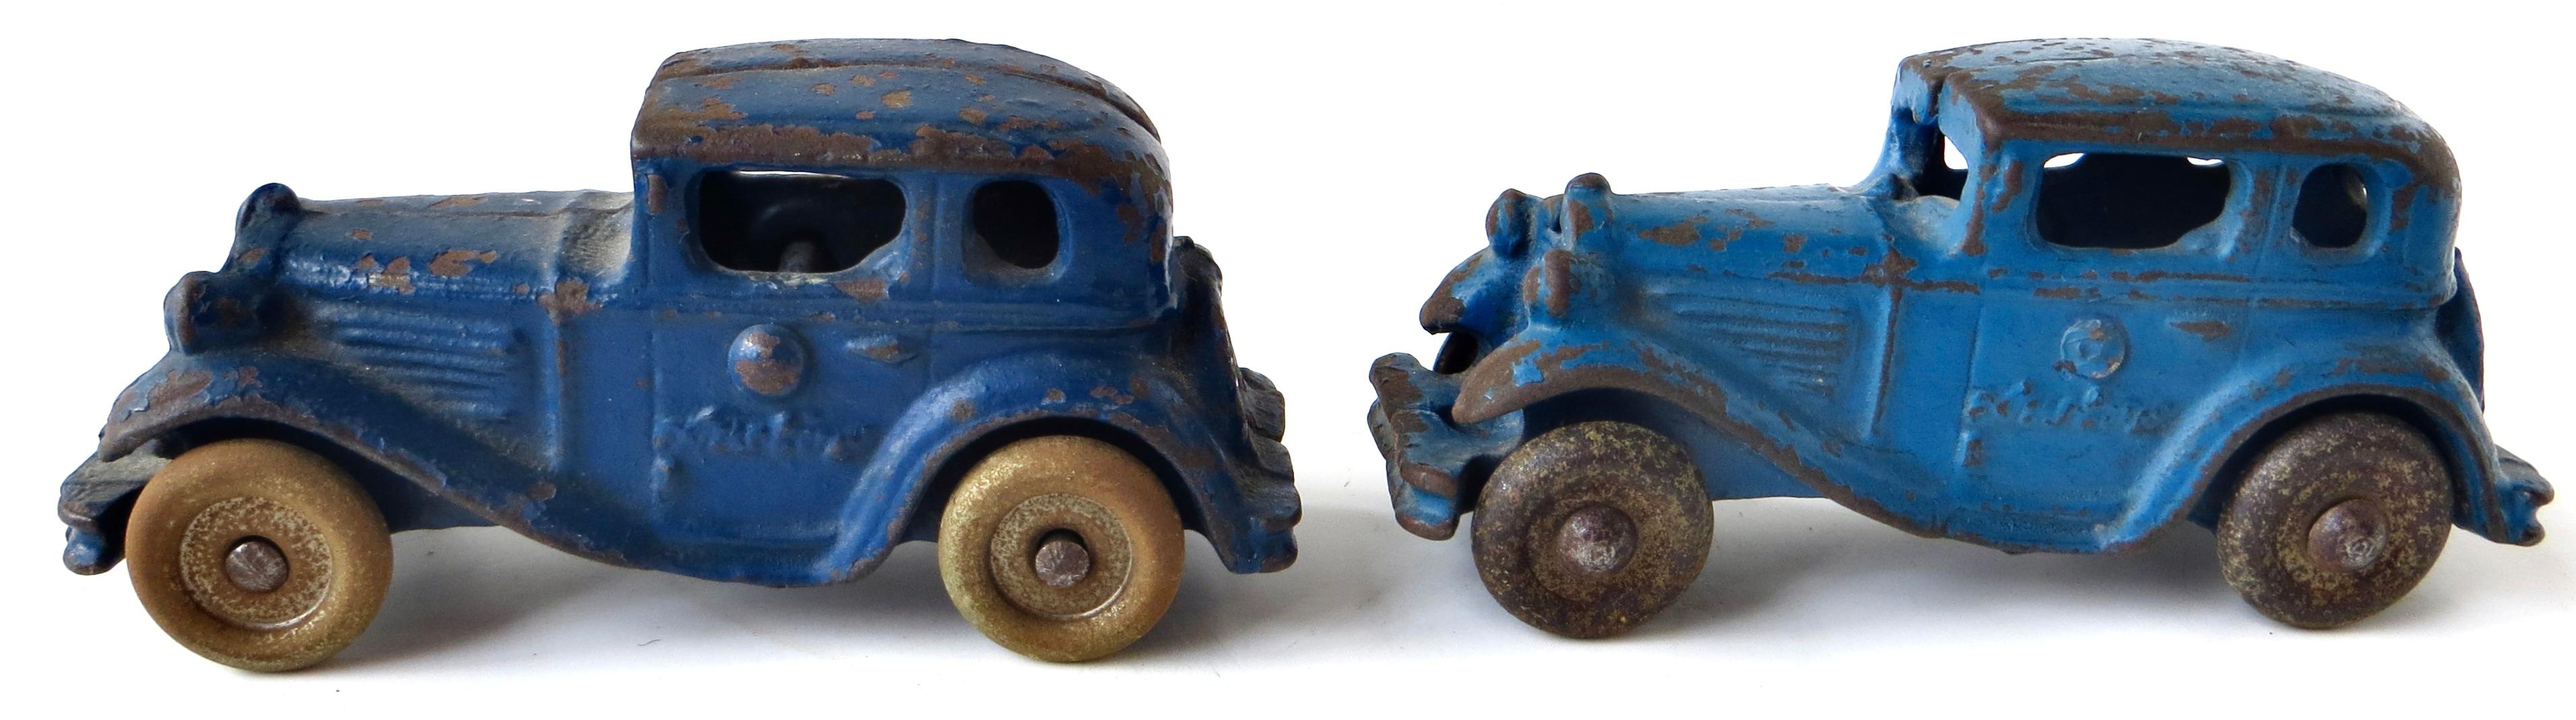 Folk Art Toy Cast Iron Truck Car Carrier; Three Cars by A.C. Williams American Circa 1930 For Sale